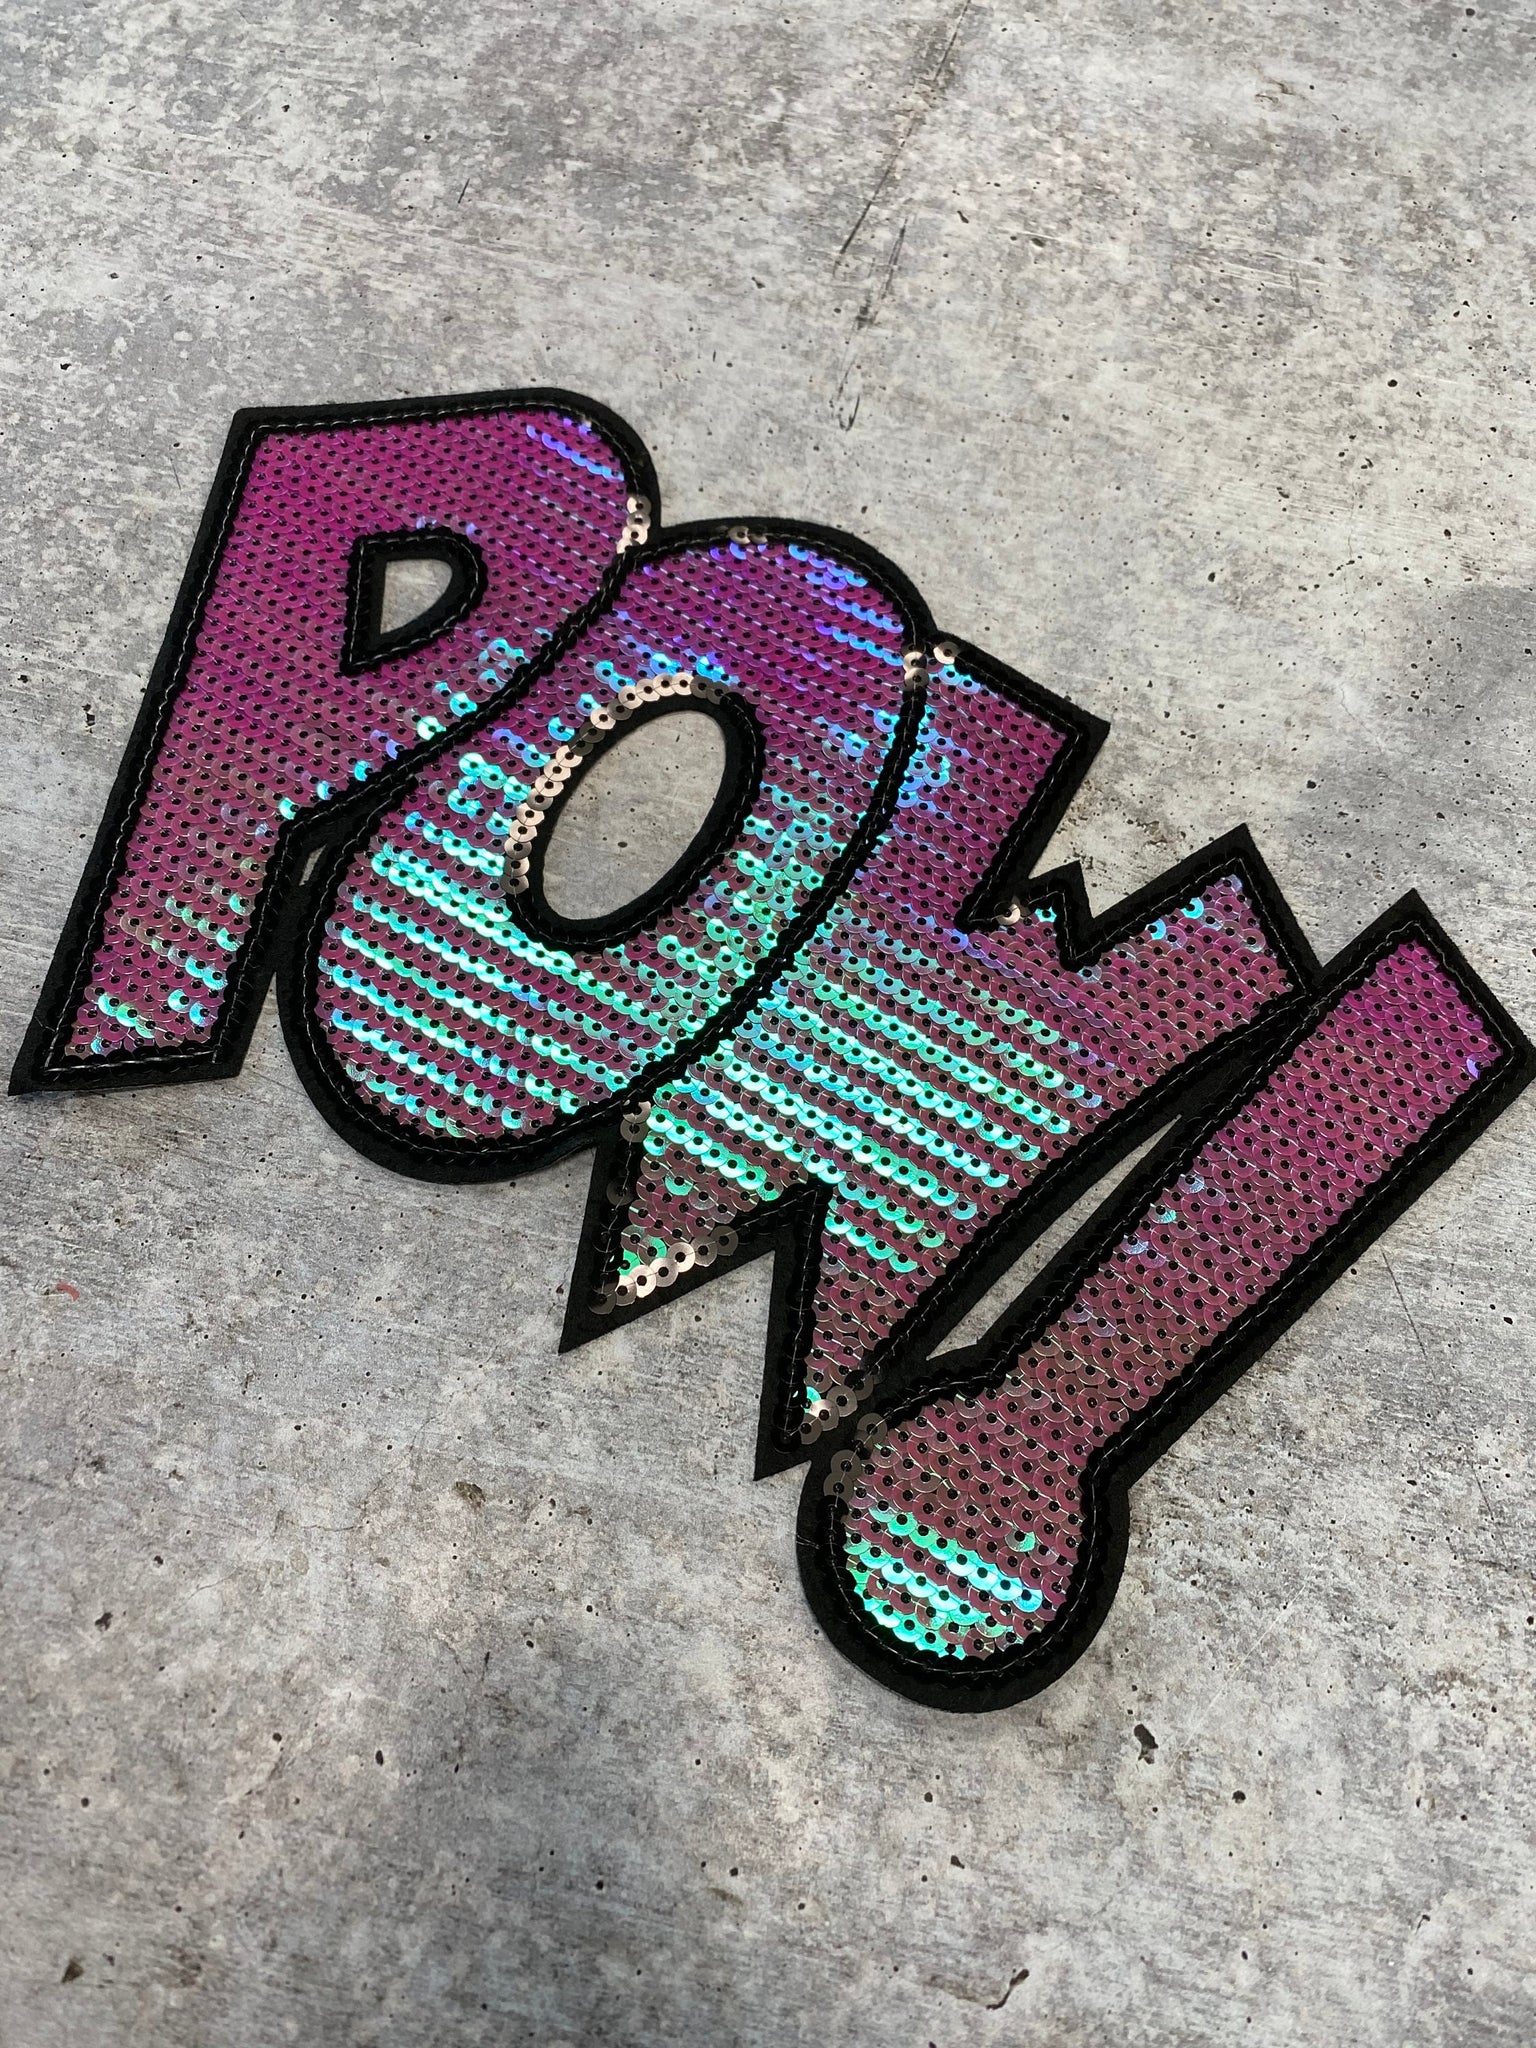 NEW, Sequins "POW!"  SEQUINS Patch, Adorable Emblem, Home Girls Statement Patch, Iron-on Embroidered Applique, Size 9.5", Jacket Patch